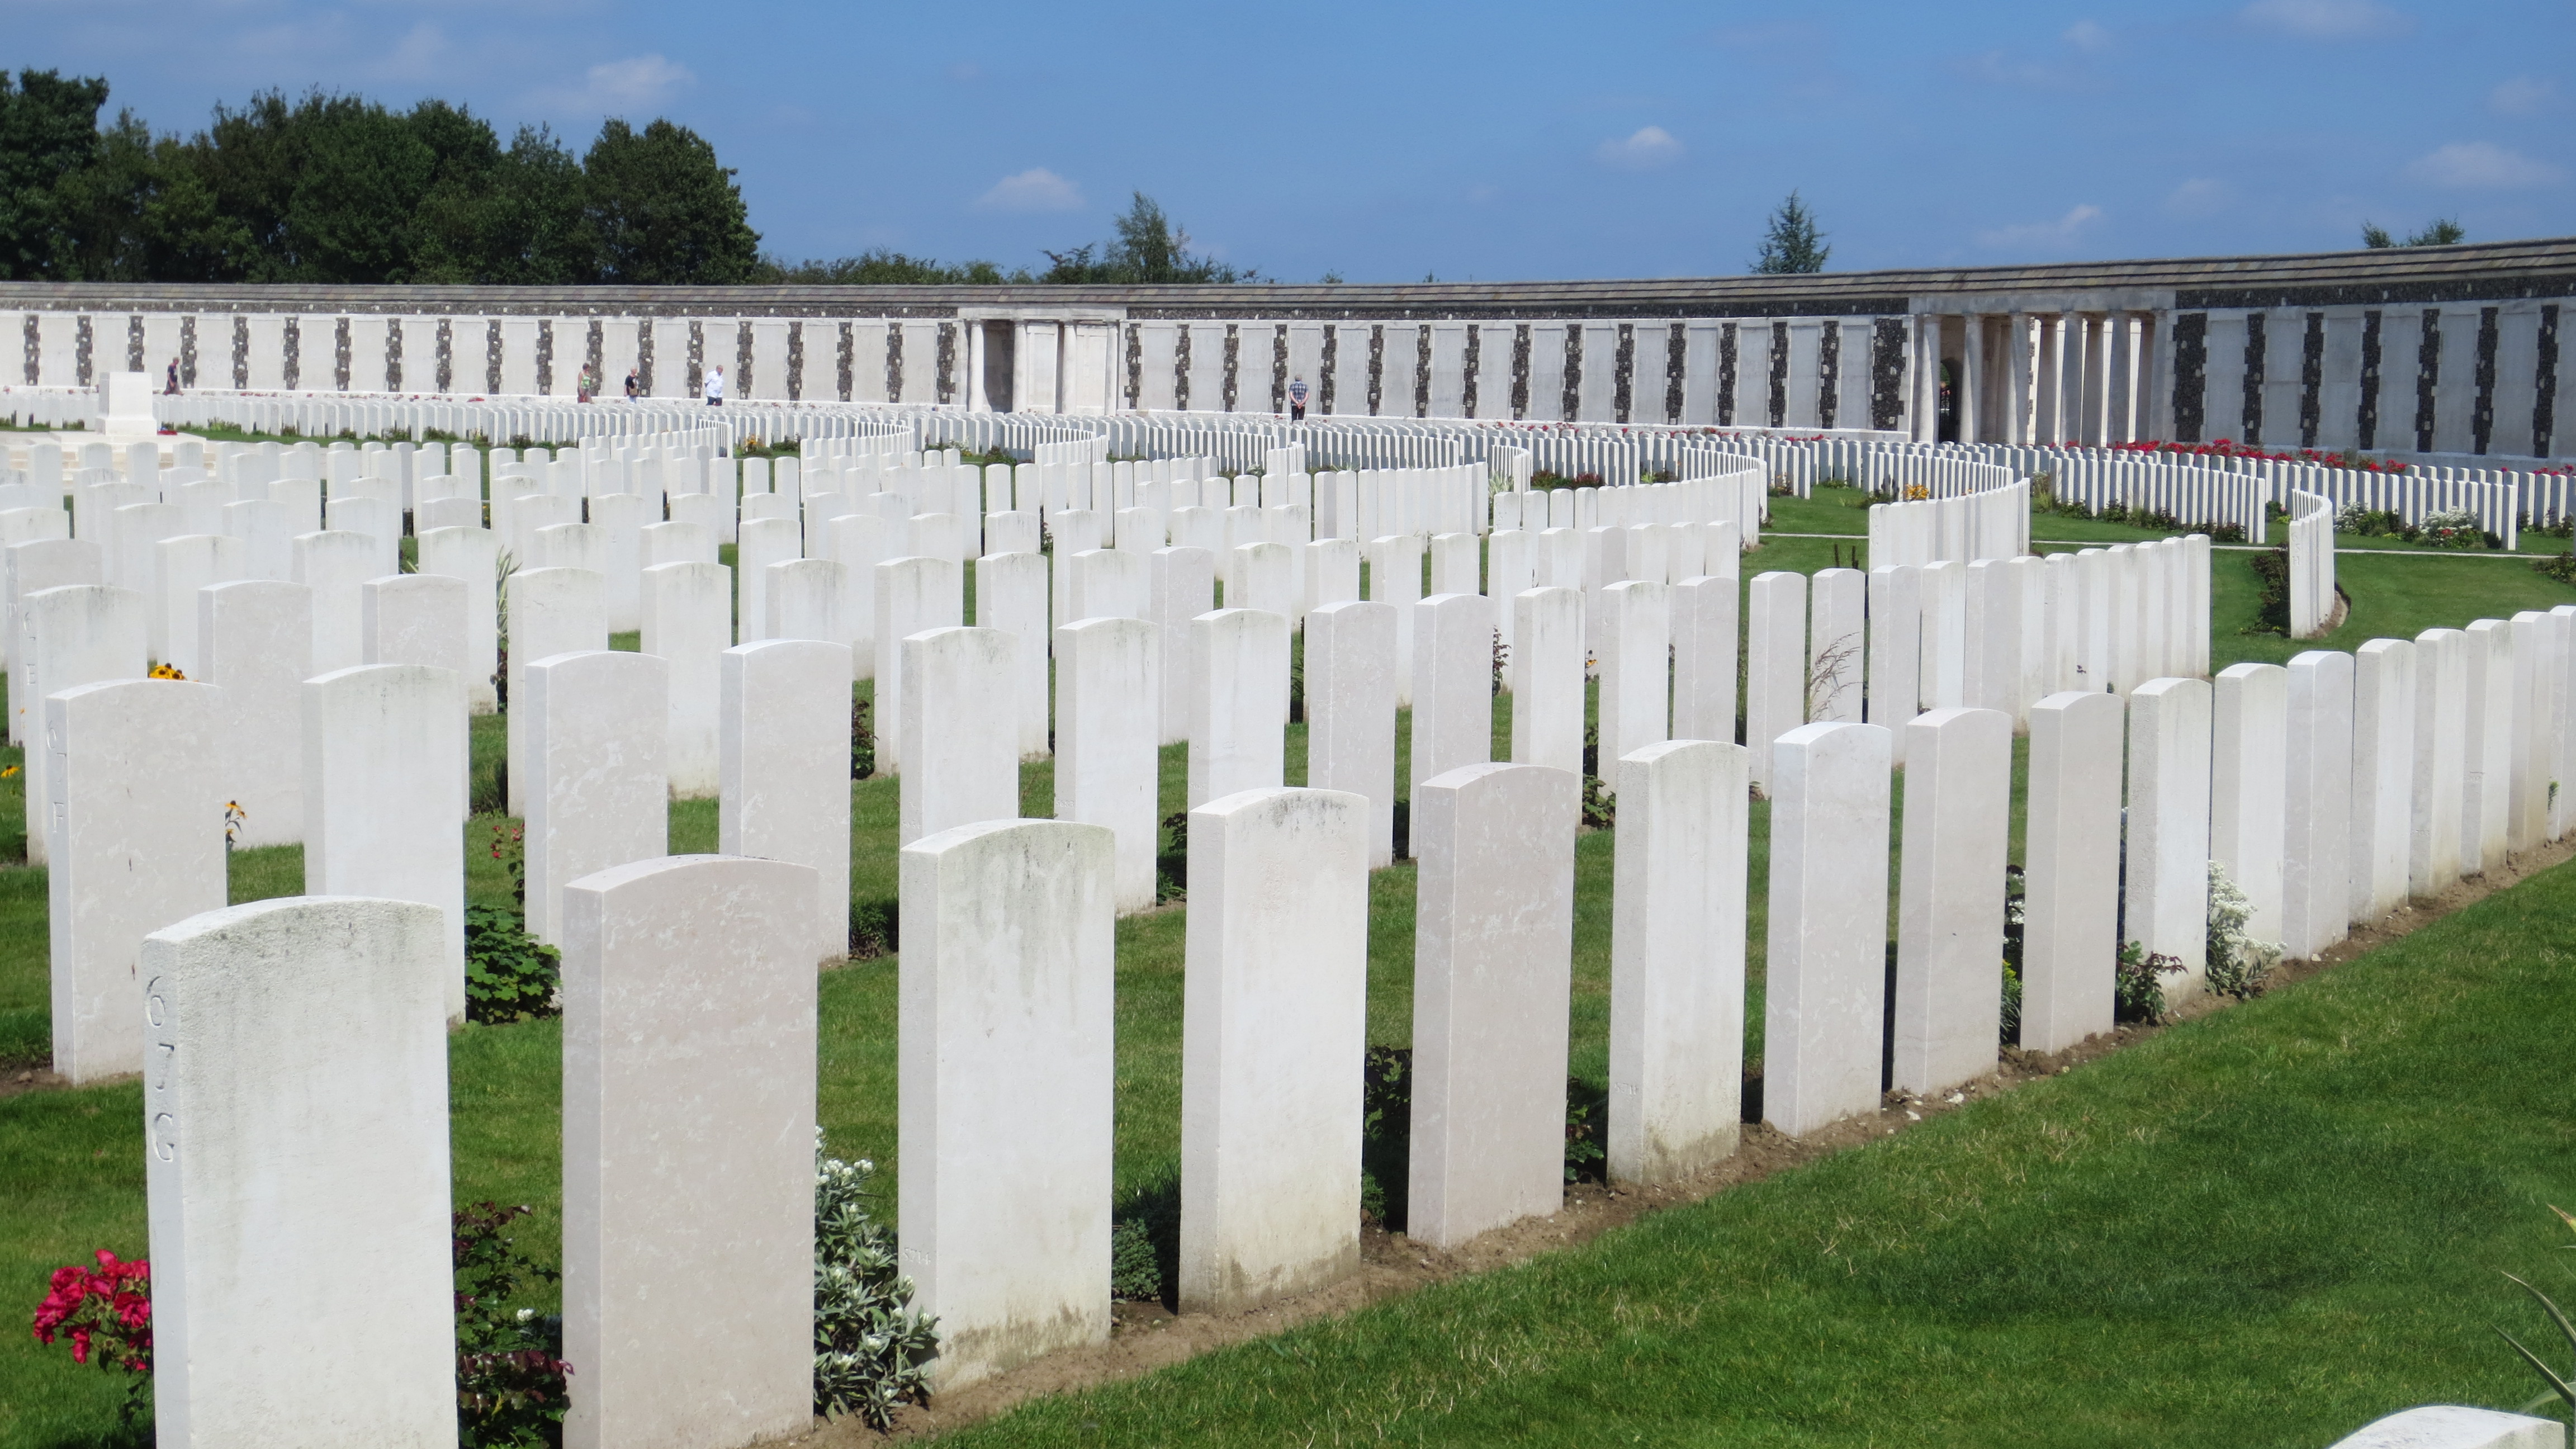 Tyne Cot Cemetary; the wall at the back contains the names of those that did not fit onto the Menin Gate Memorial